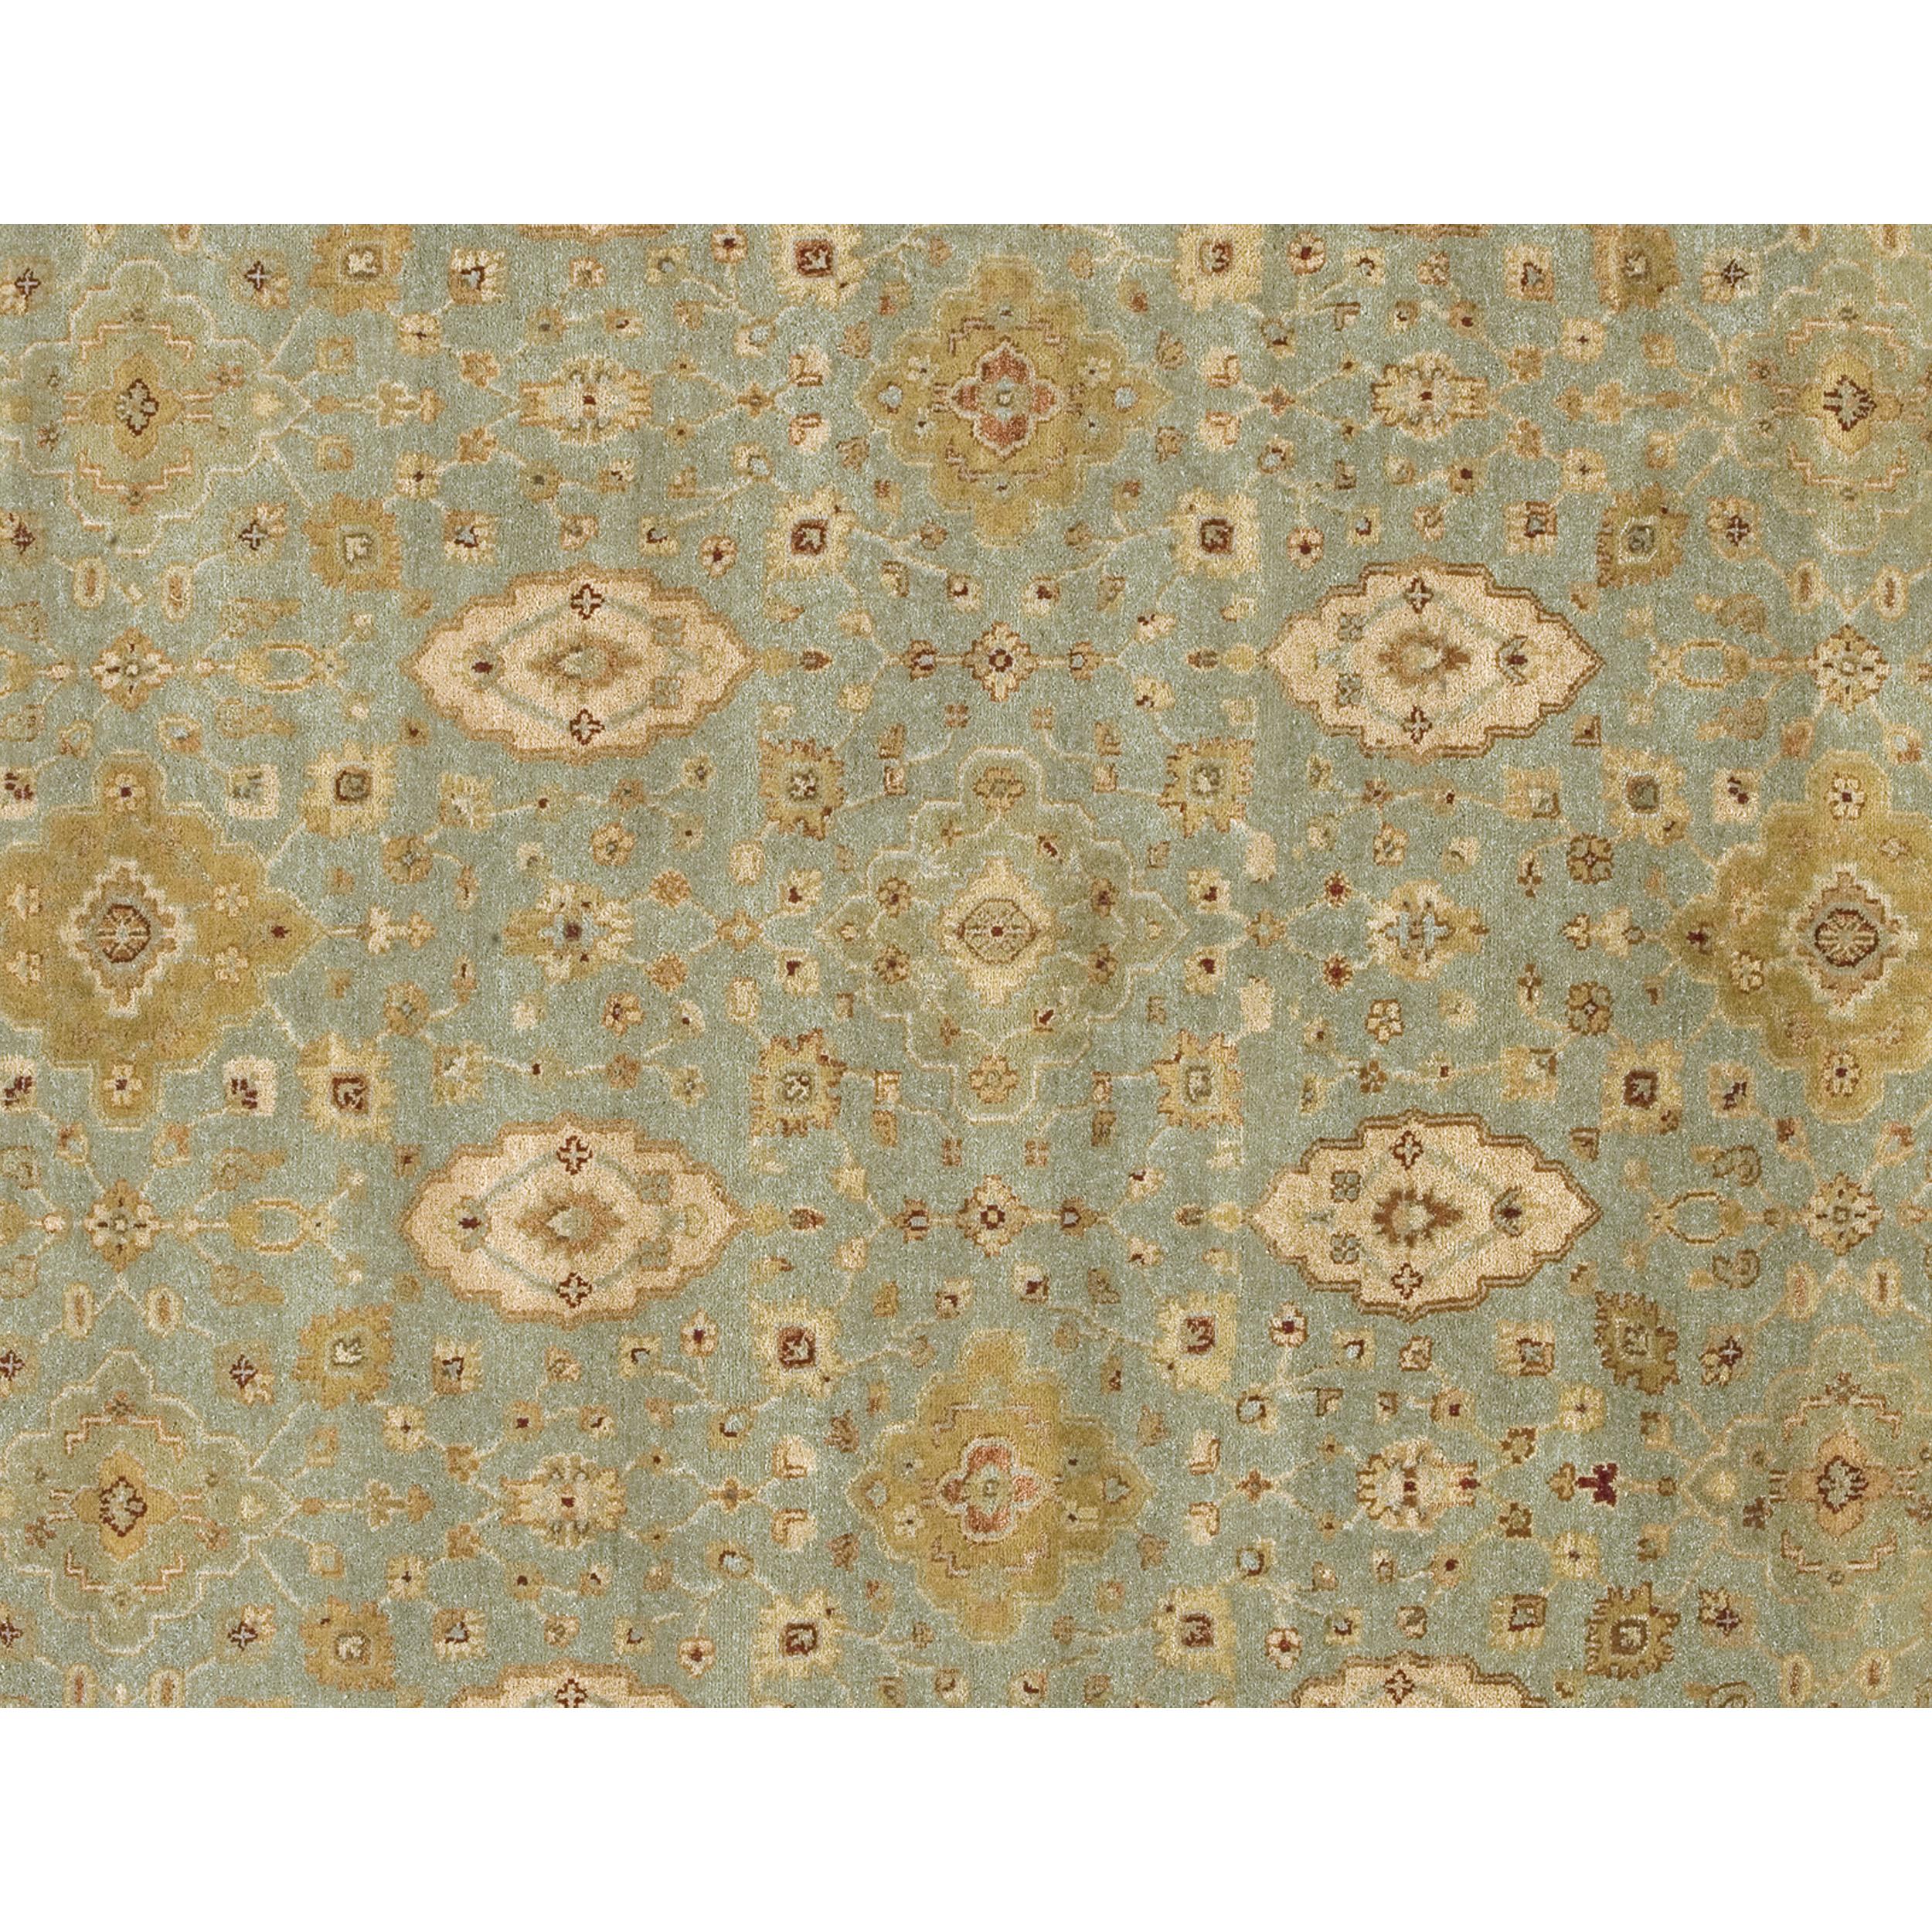 Indian Luxury Traditional Hand-Knotted Vase Aqua & Beige 12x15 Rug For Sale